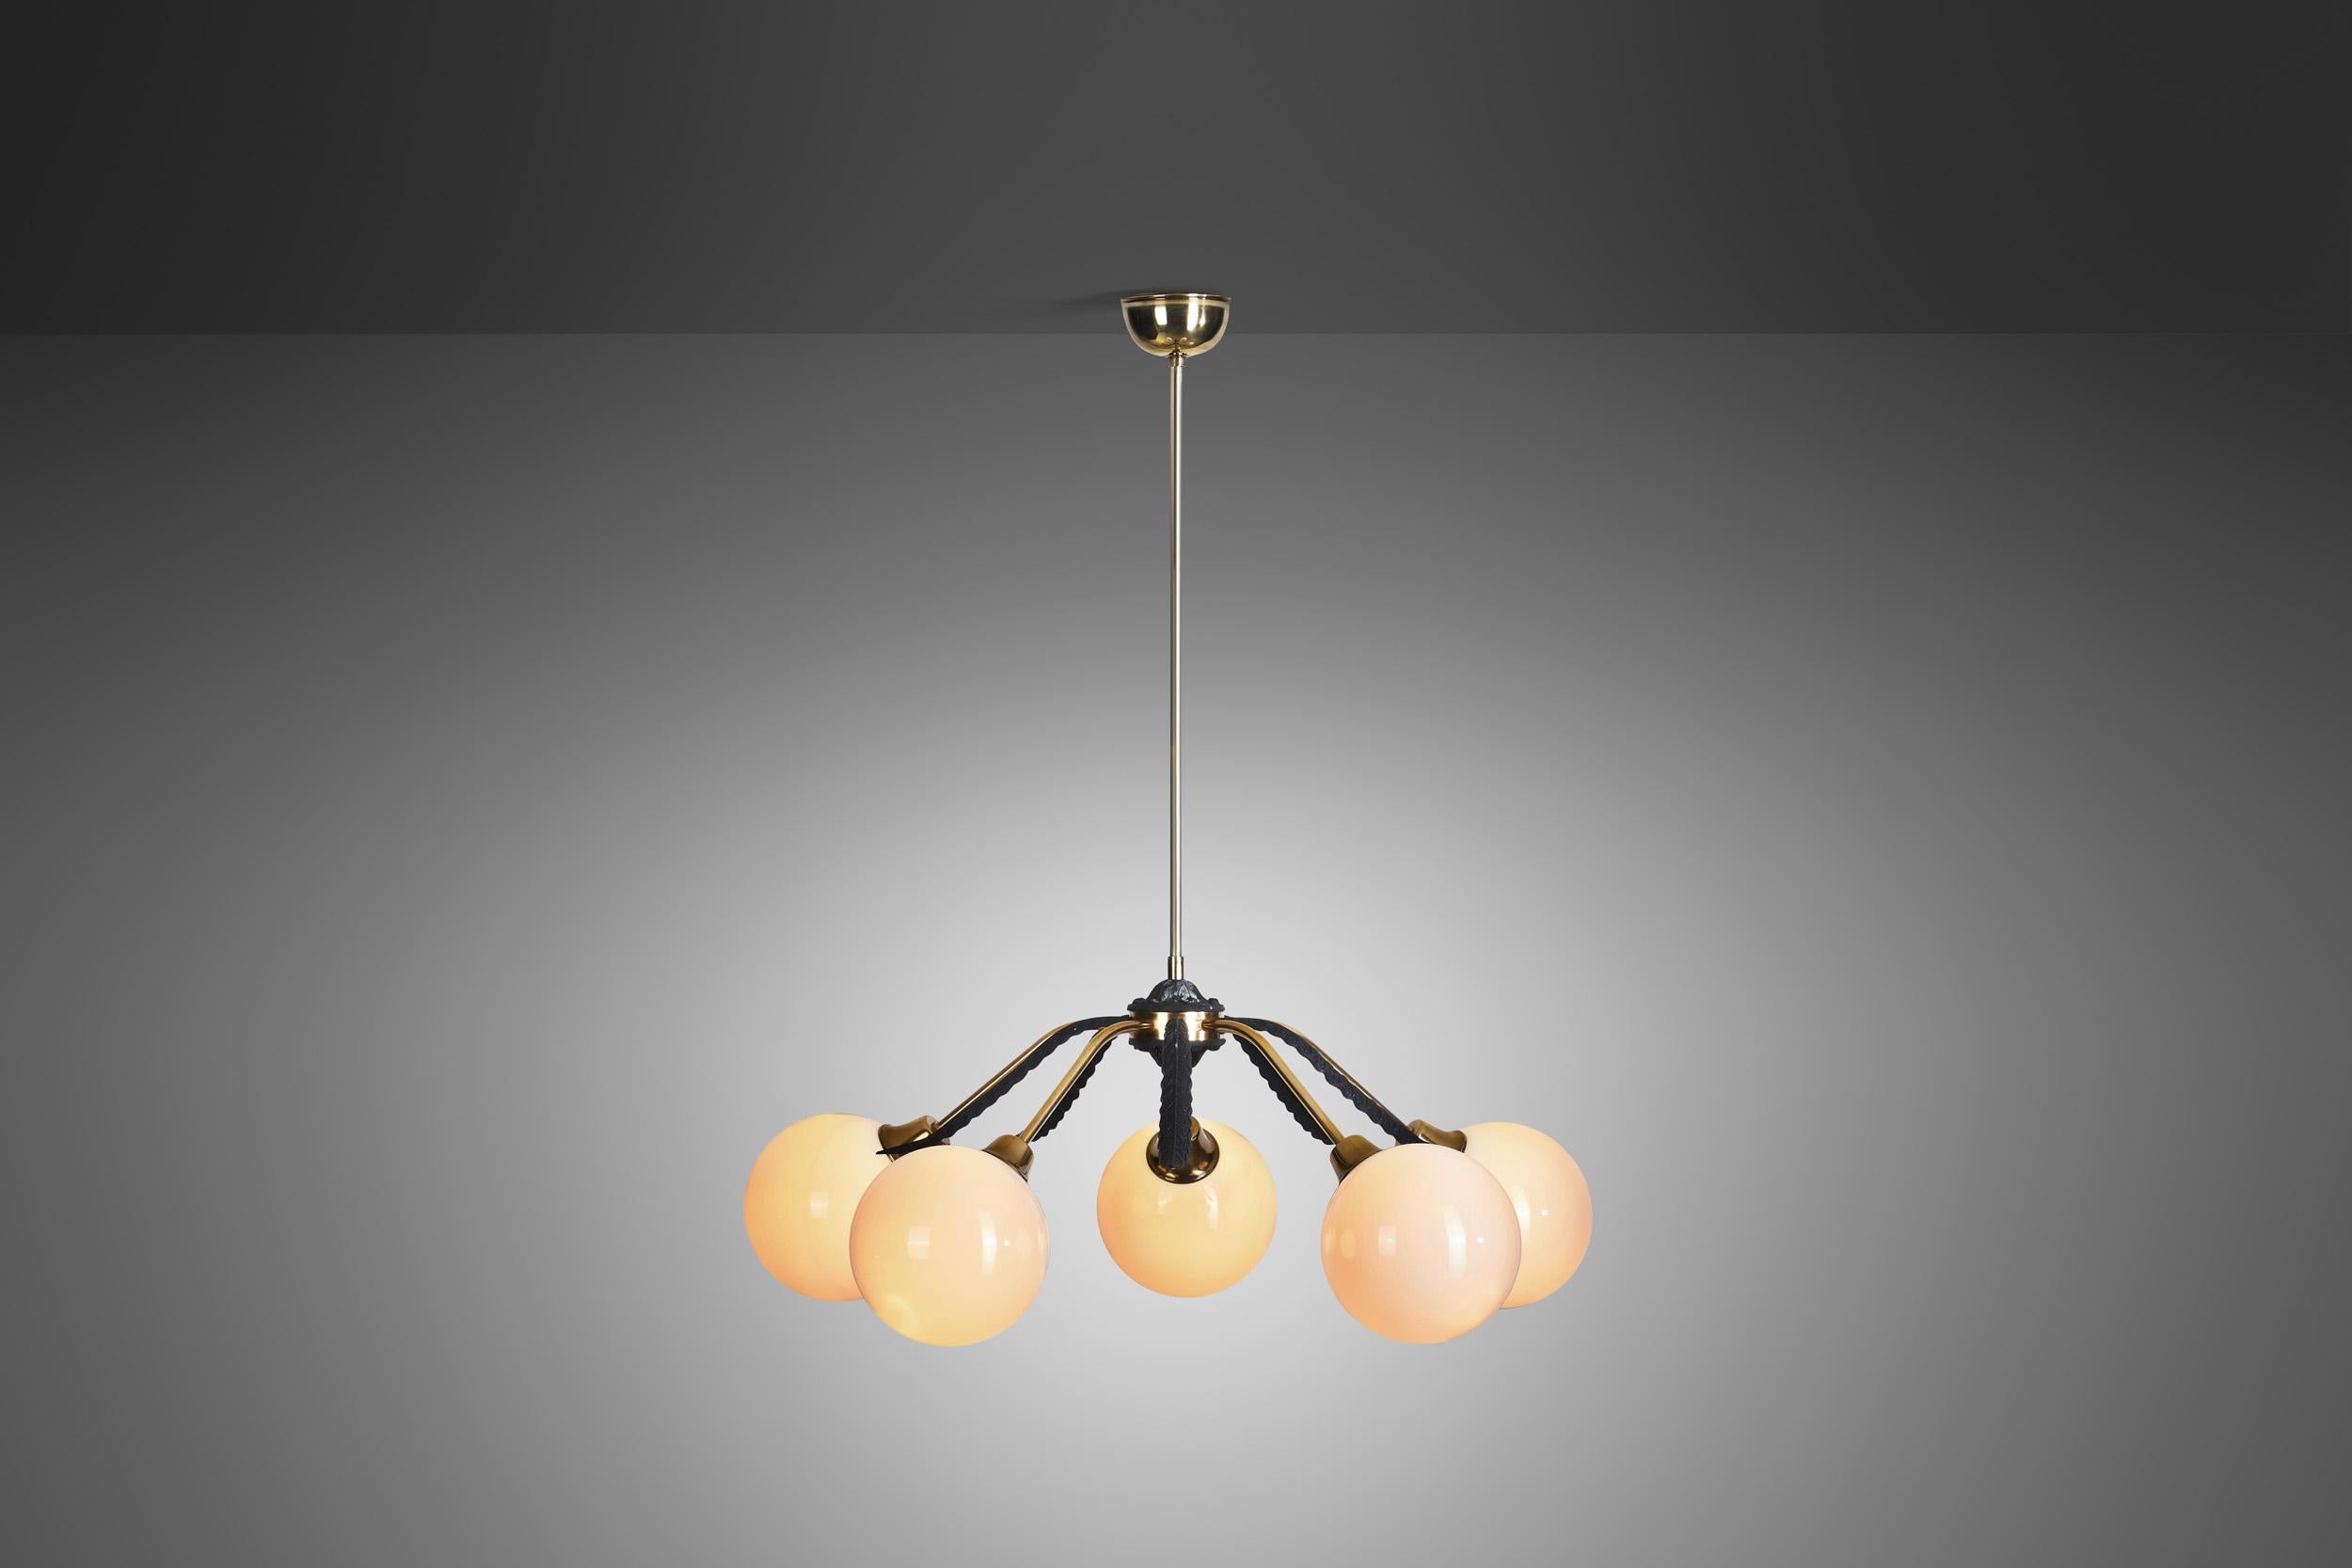 Mid-20th Century European Mid-Century Modern Brass Ceiling Lamp with Leaf Motif, Europe Ca 1950s For Sale